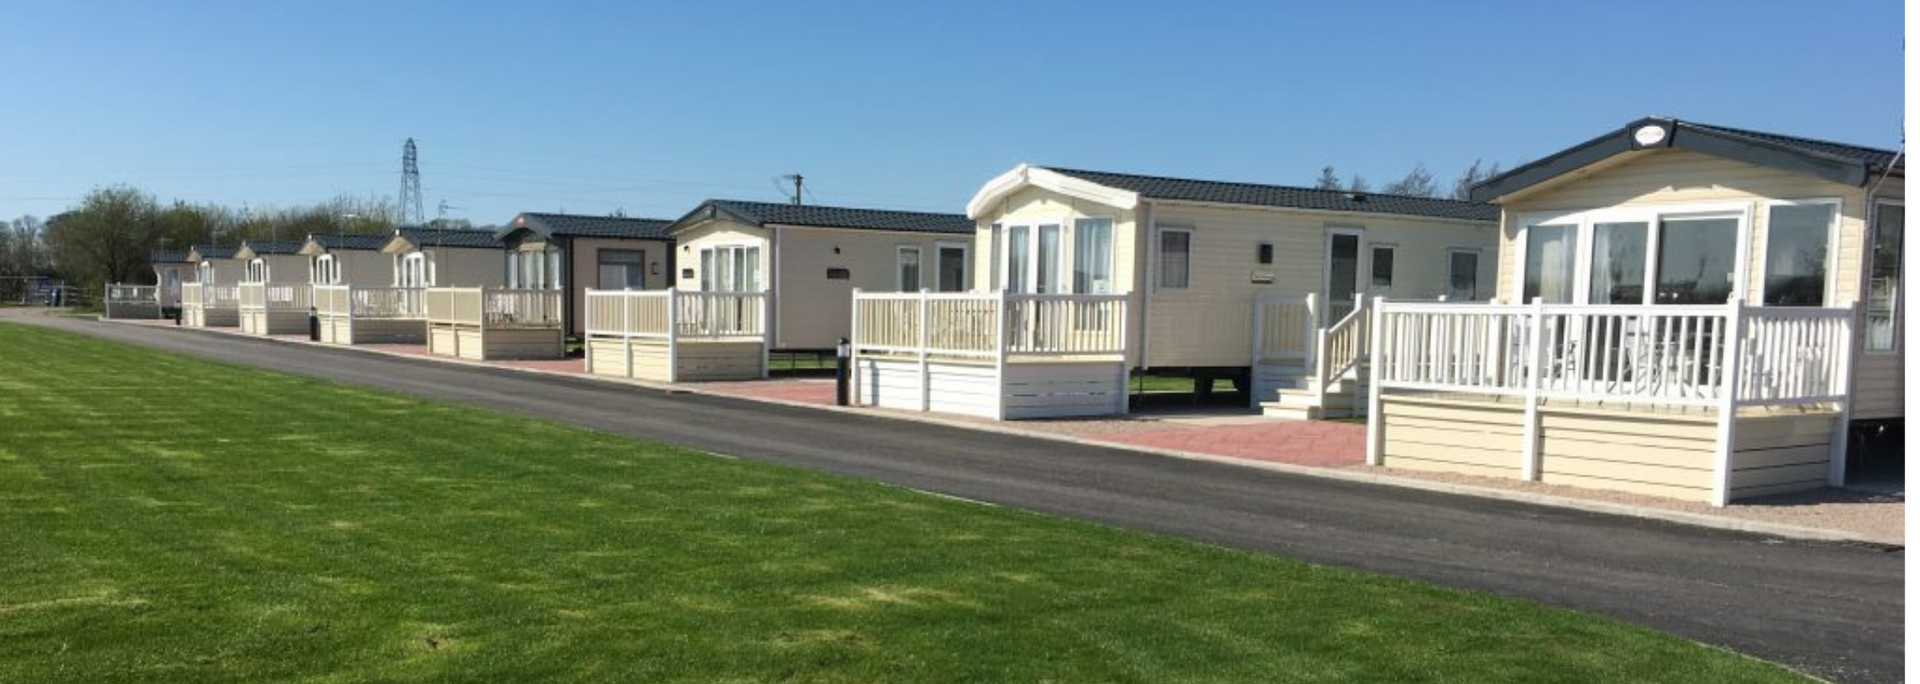 Picture of Riverside Holiday Park.